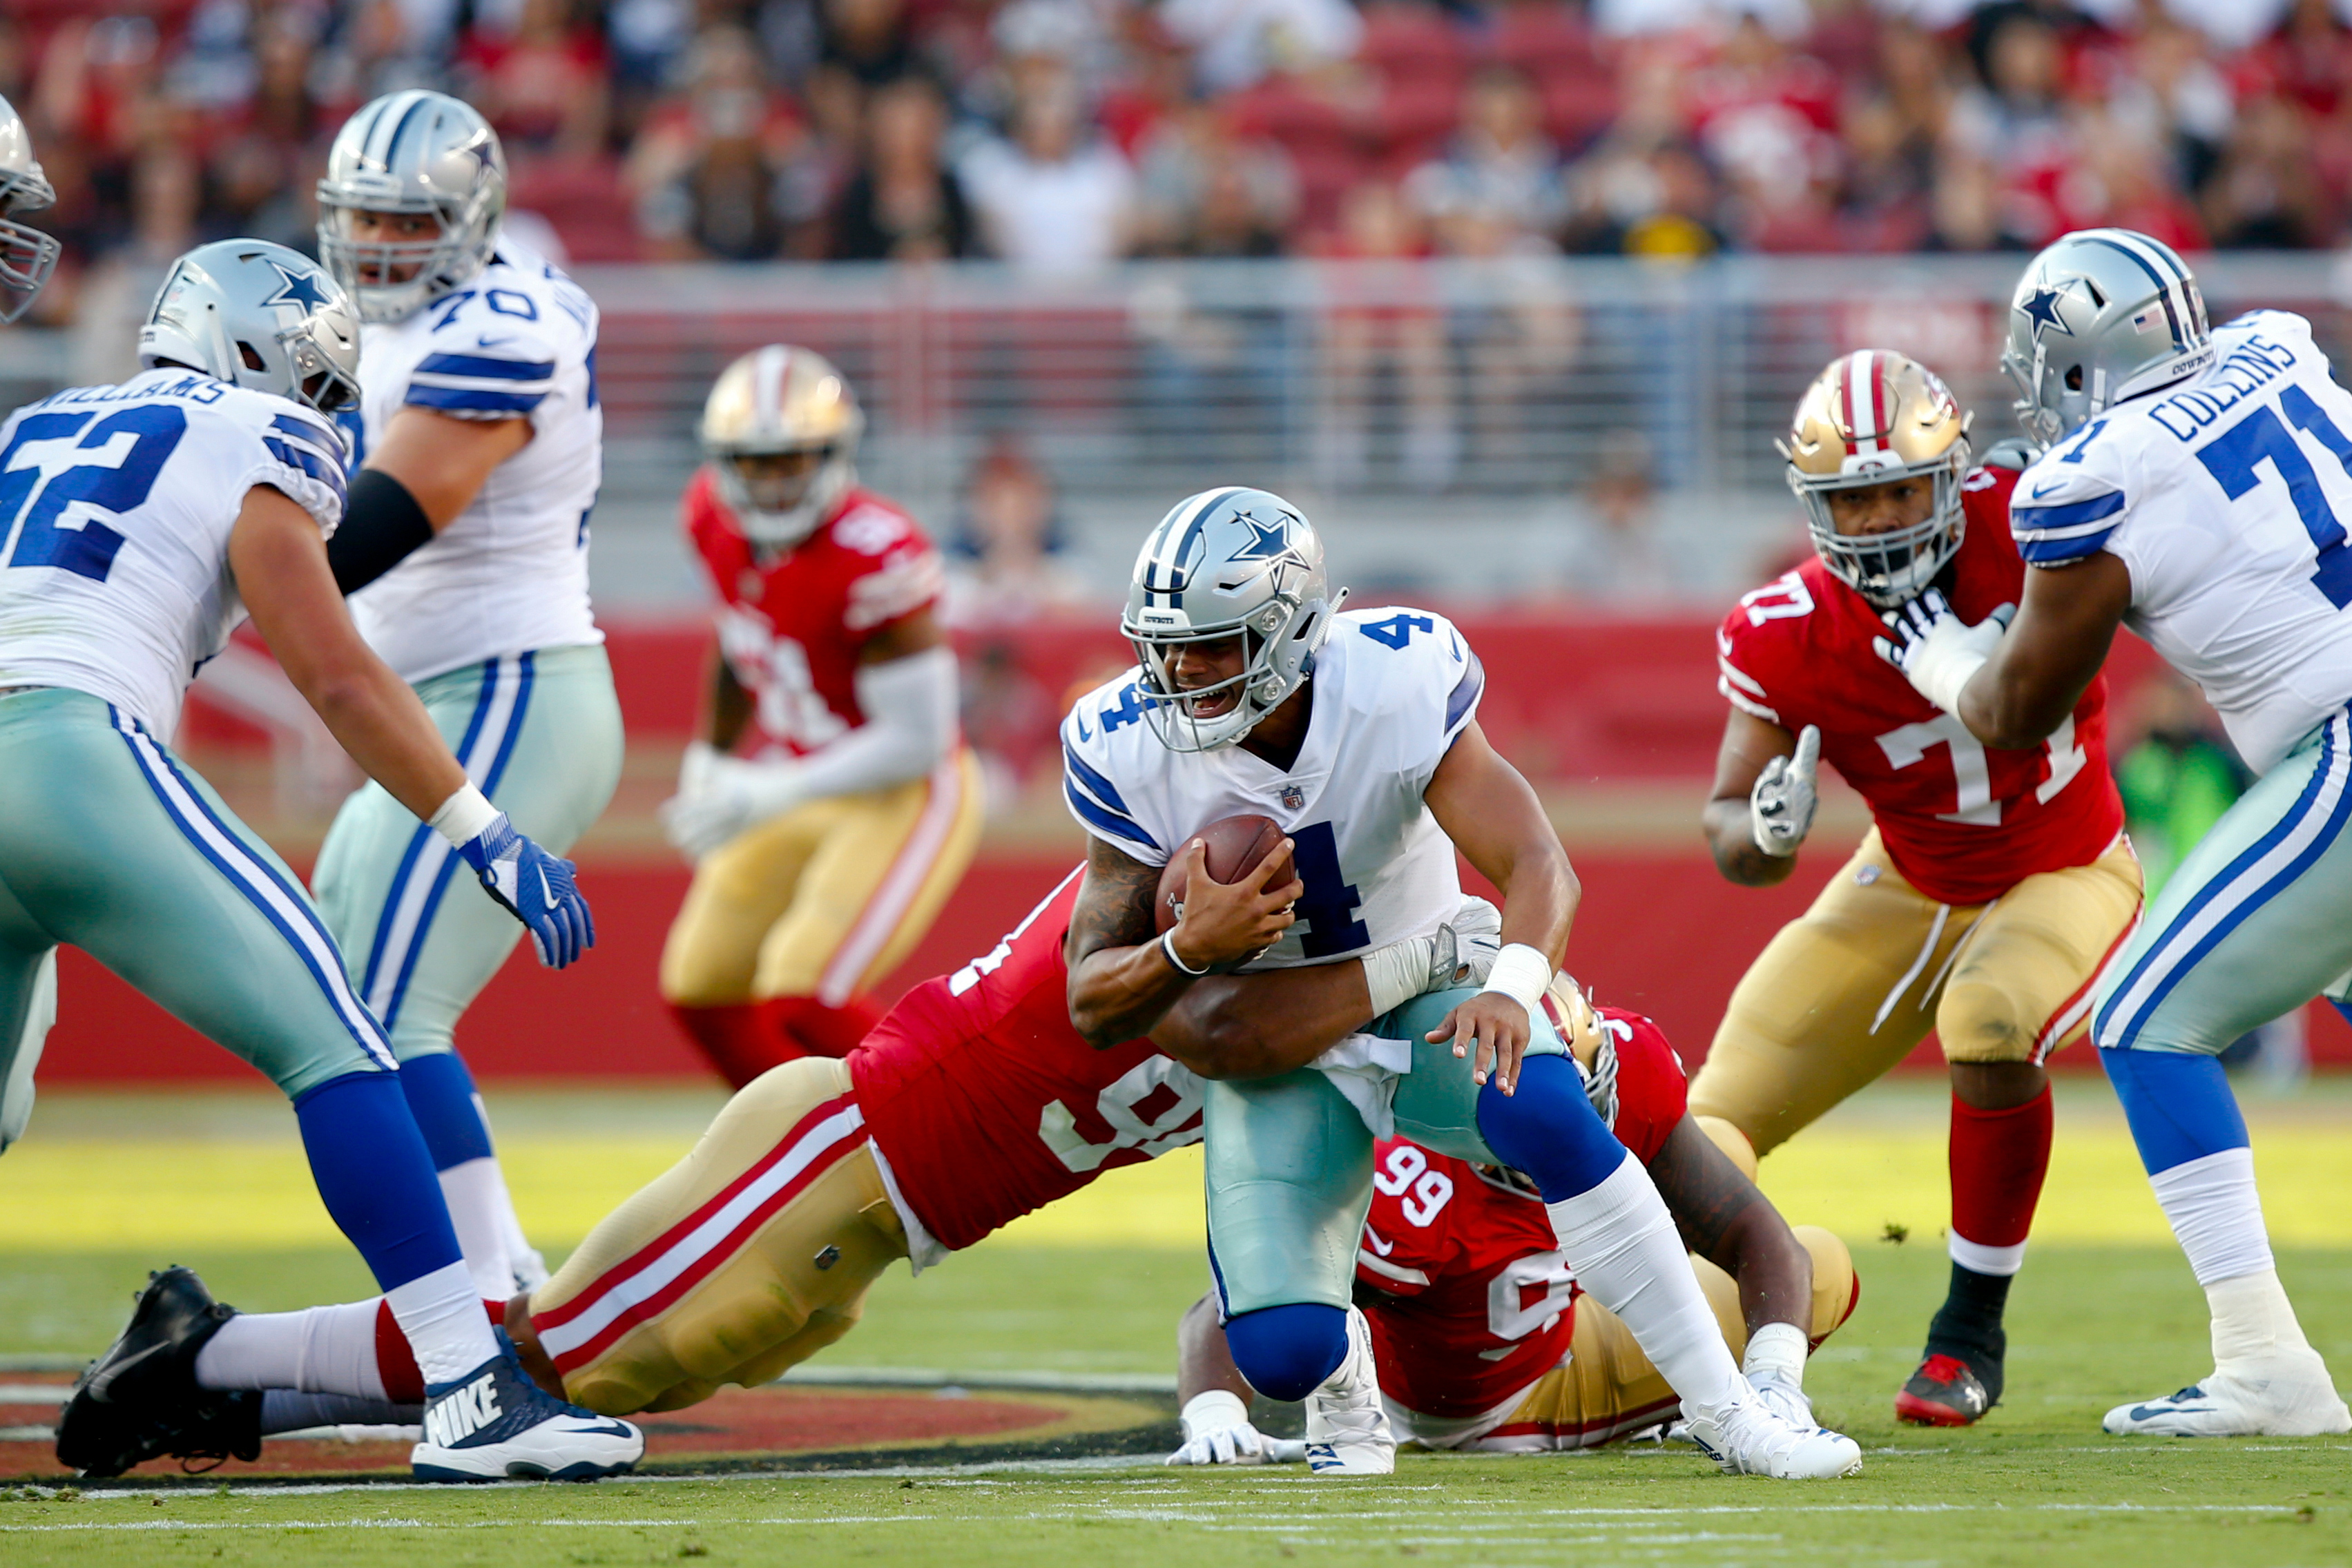 The Cowboys and 49ers meet Sunday in the Super Wild Card Round